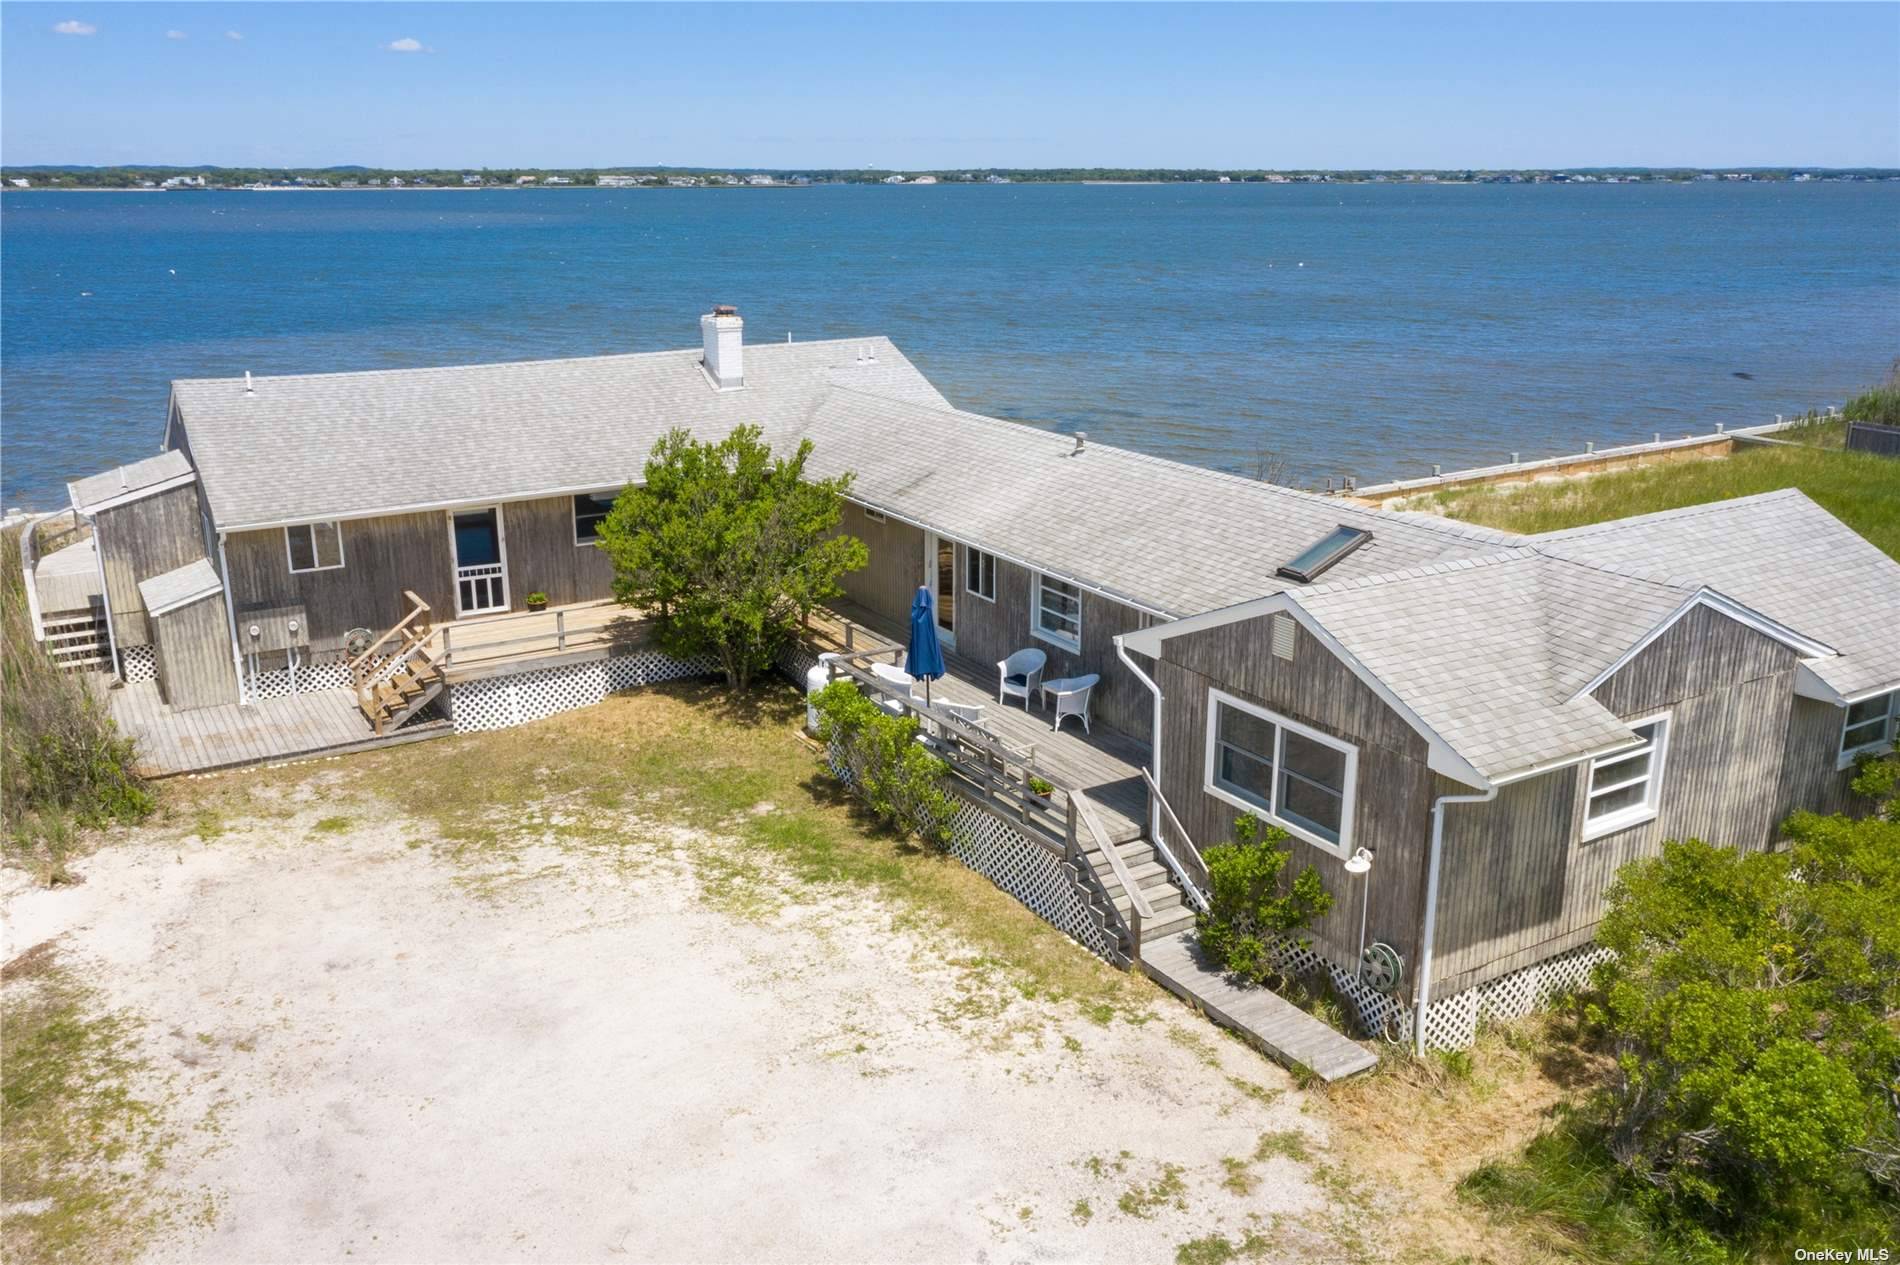 Bayfront beach living in Westhampton Dunes at this unique compound with ocean beach access across the street !